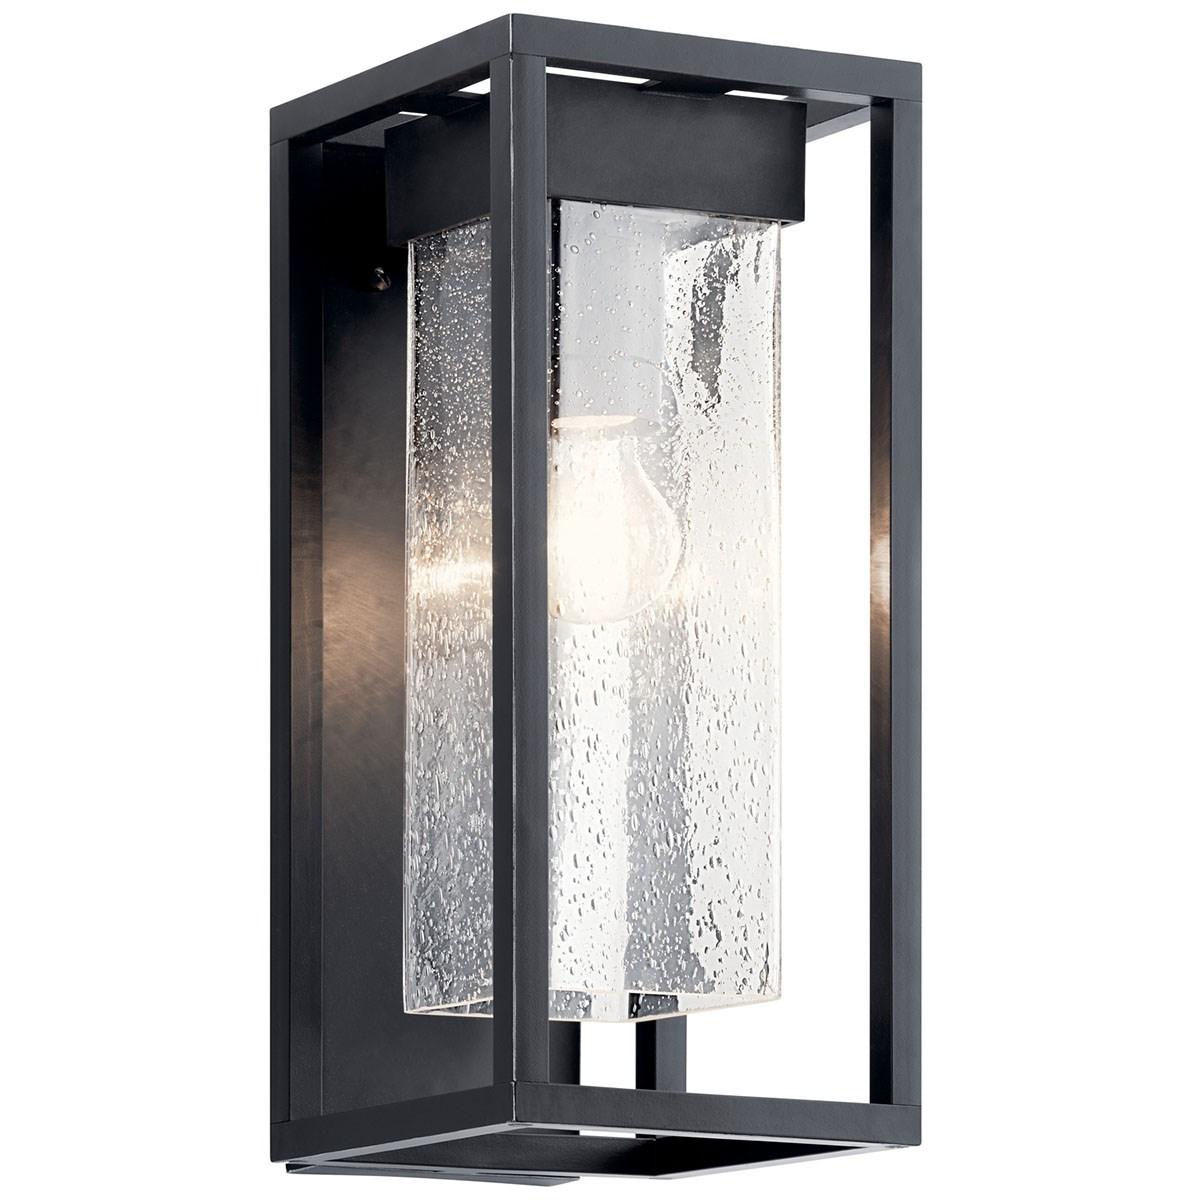 Mercer 16 in. Outdoor Wall Sconce